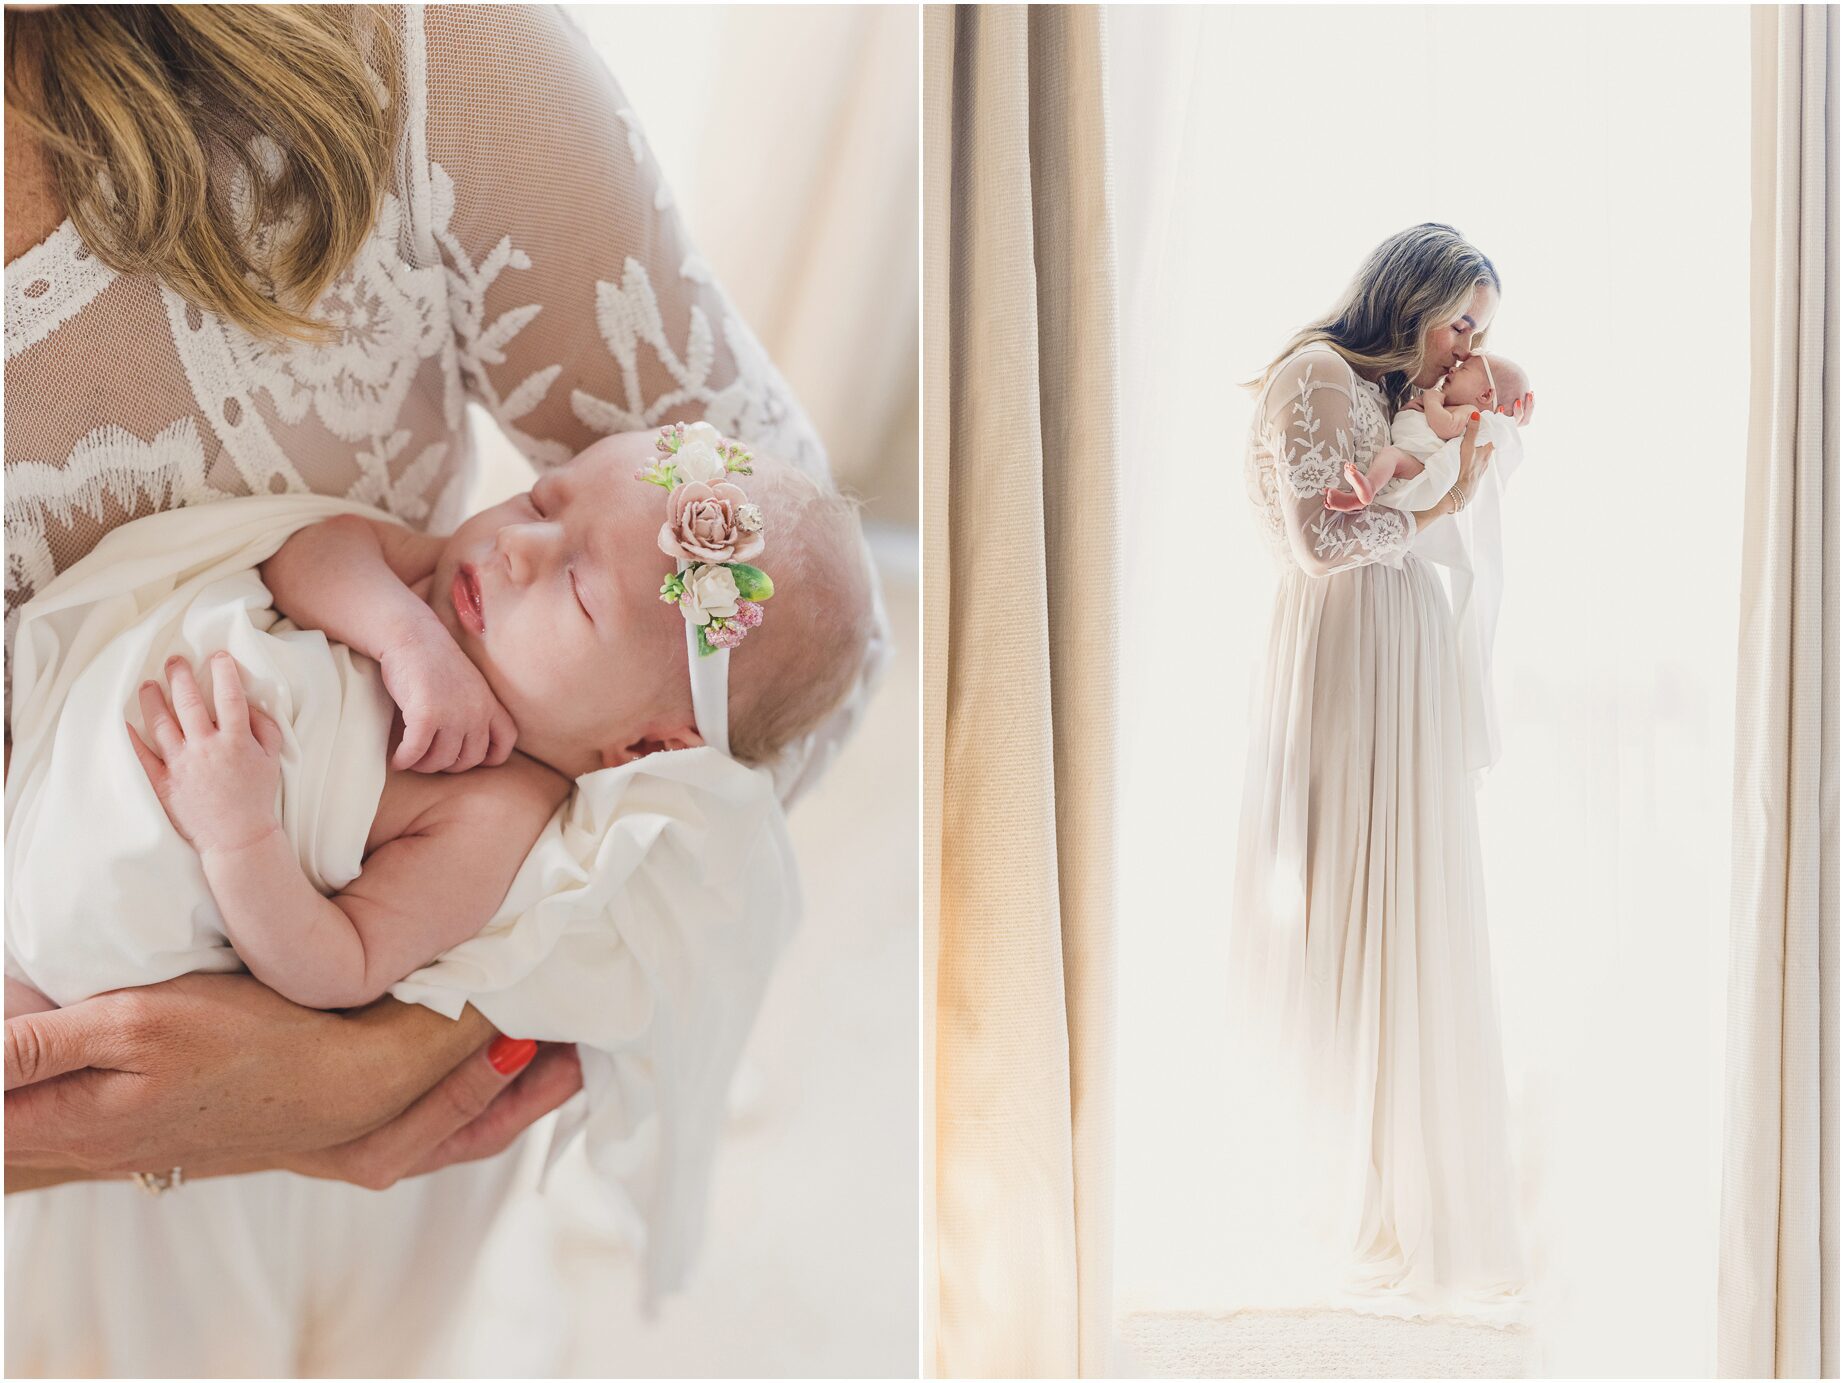 Emma and her mother in their Dreamy PNW Newborn Photos